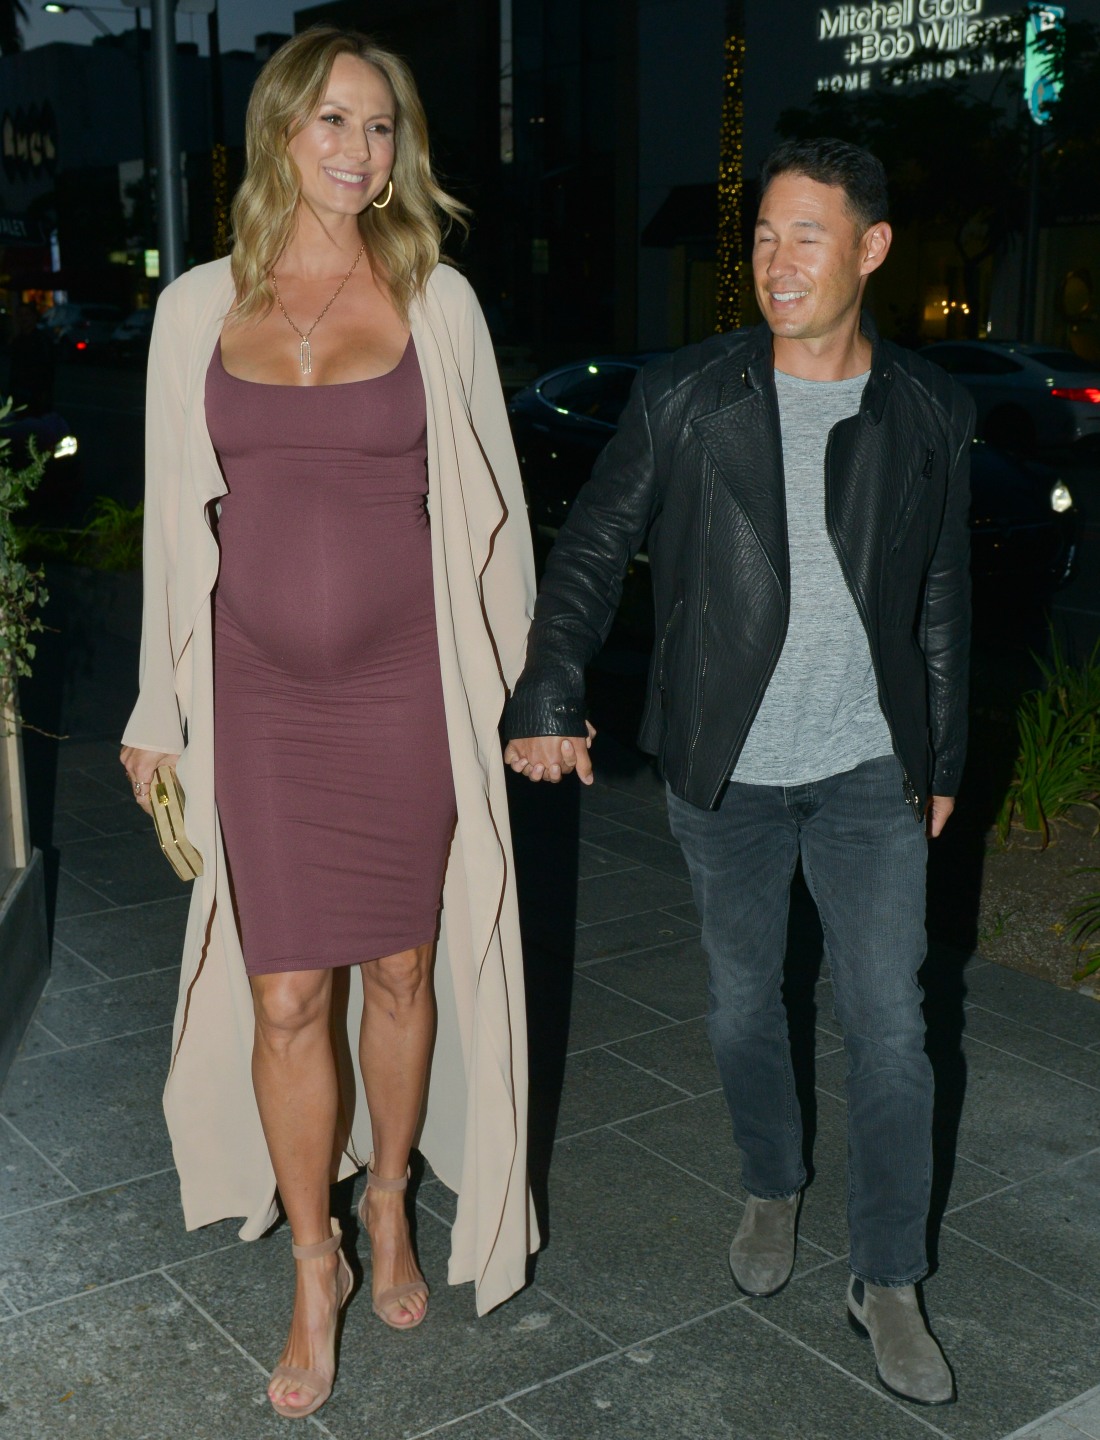 Stacy Keibler Looking Very Pregnant While Out On A Dinner Date.